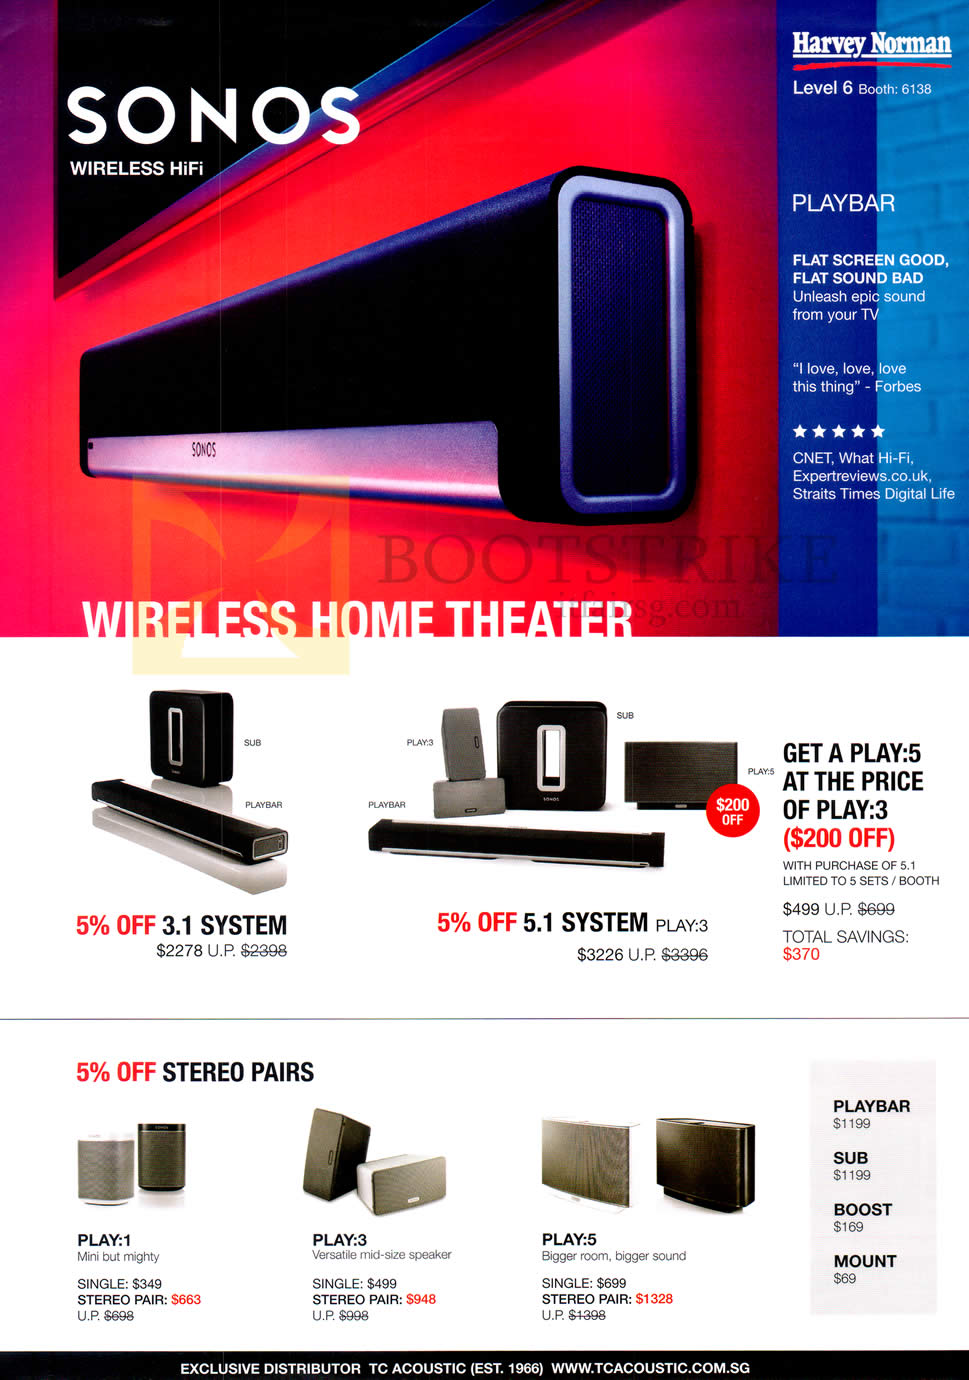 IT SHOW 2015 price list image brochure of Harvey Norman Sonos Home Theatre Systems 3.1 System, 5.1 System, Play 1, 3, 5, Playbar